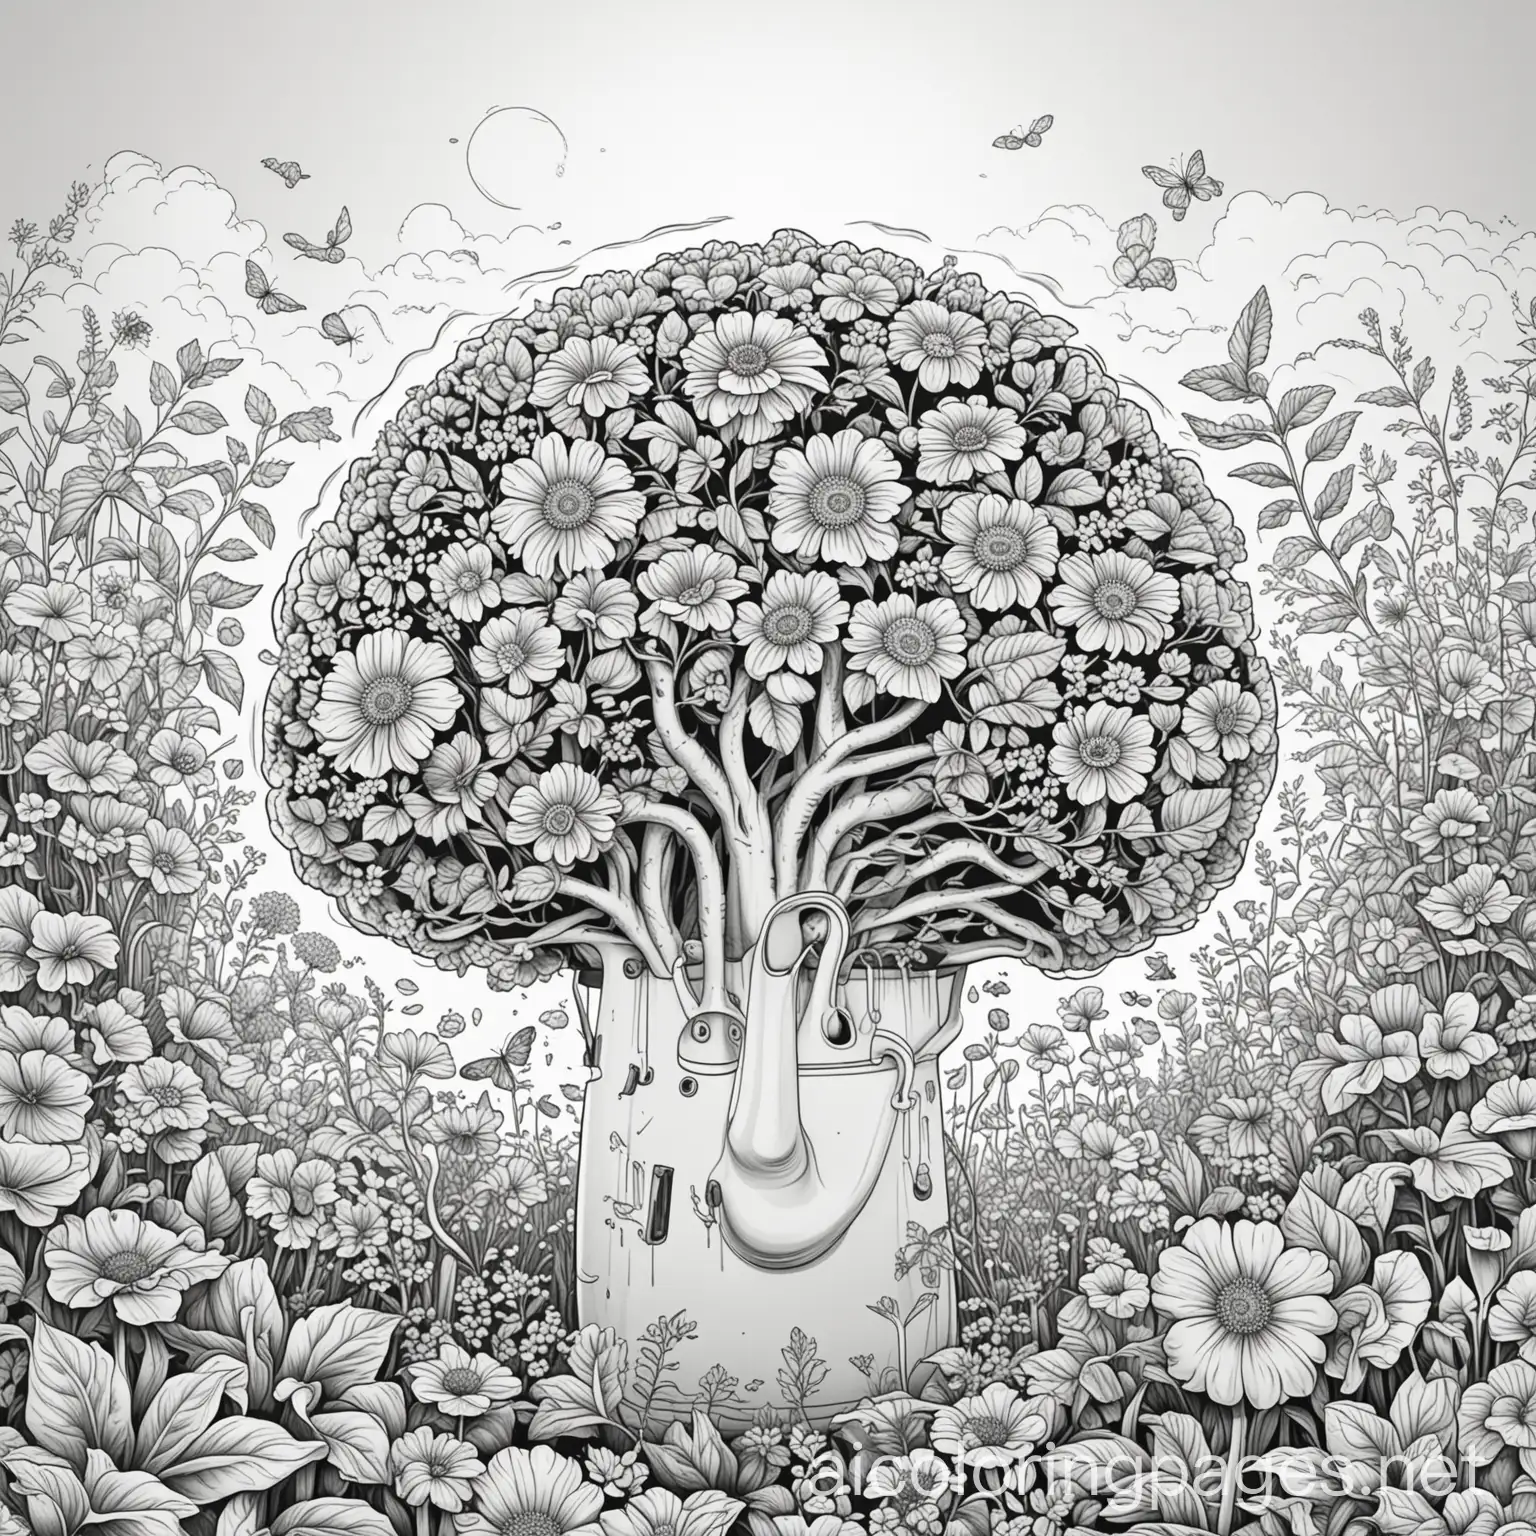 An outlined illustration of a garden scene with a large brain or mind shape in the center. The brain is surrounded by flowers, leaves, and vines, with a small watering can and sunshine above, line art, coloring page, black and white, white background, simplicity, Coloring Page, black and white, line art, white background, Simplicity, Ample White Space.